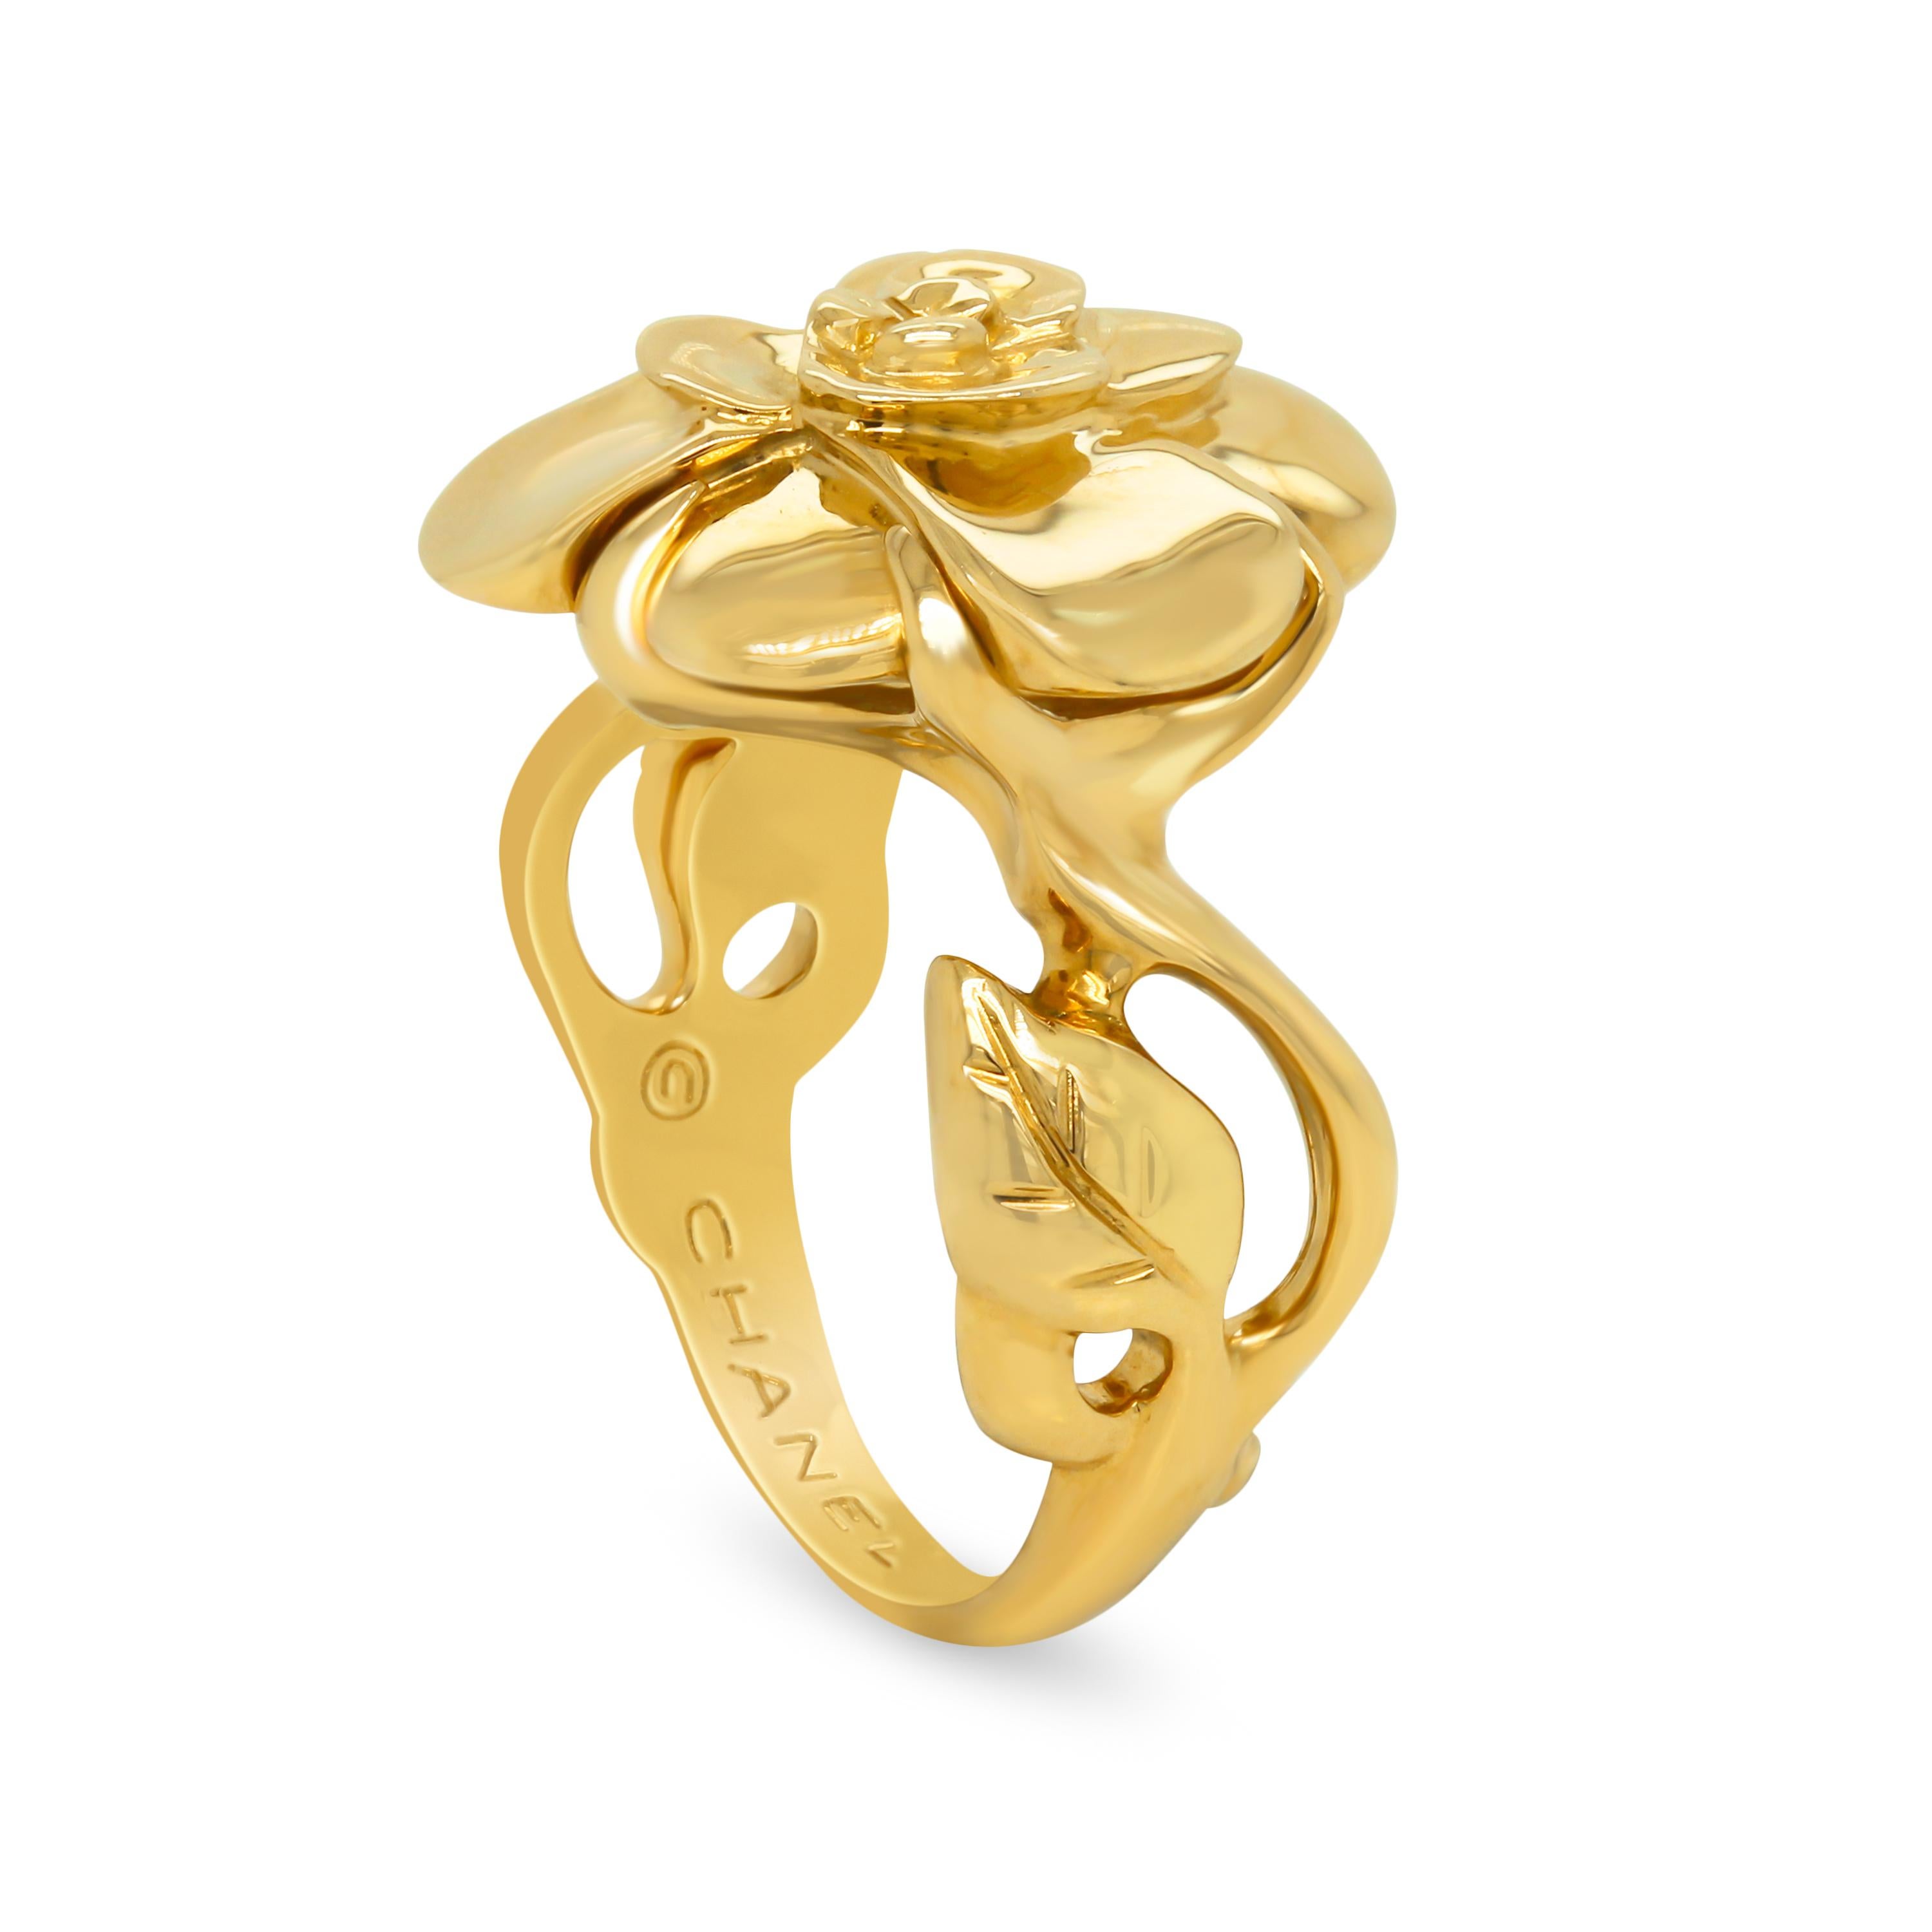 Chanel Camellia Flower Motif 18 Karat Yellow Gold Cocktail Ring

Gorgeous attention to detail, this floral motif ring showcases the flower in the center with the design continuing on both sides of the band.

Ring face is 17.6mm in width.

Ring is a